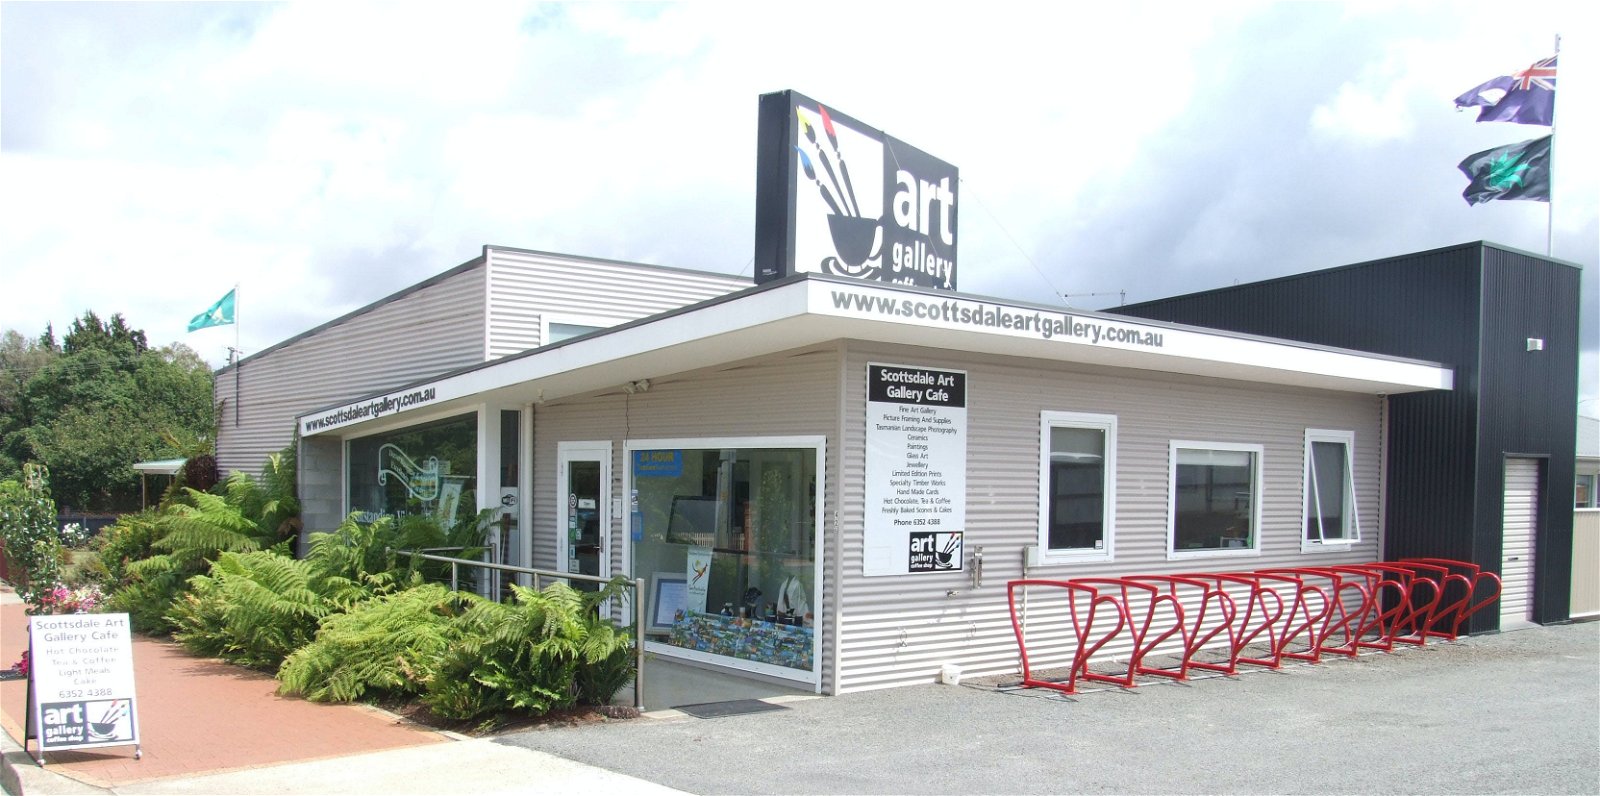 Scottsdale Art Gallery Cafe - Northern Rivers Accommodation